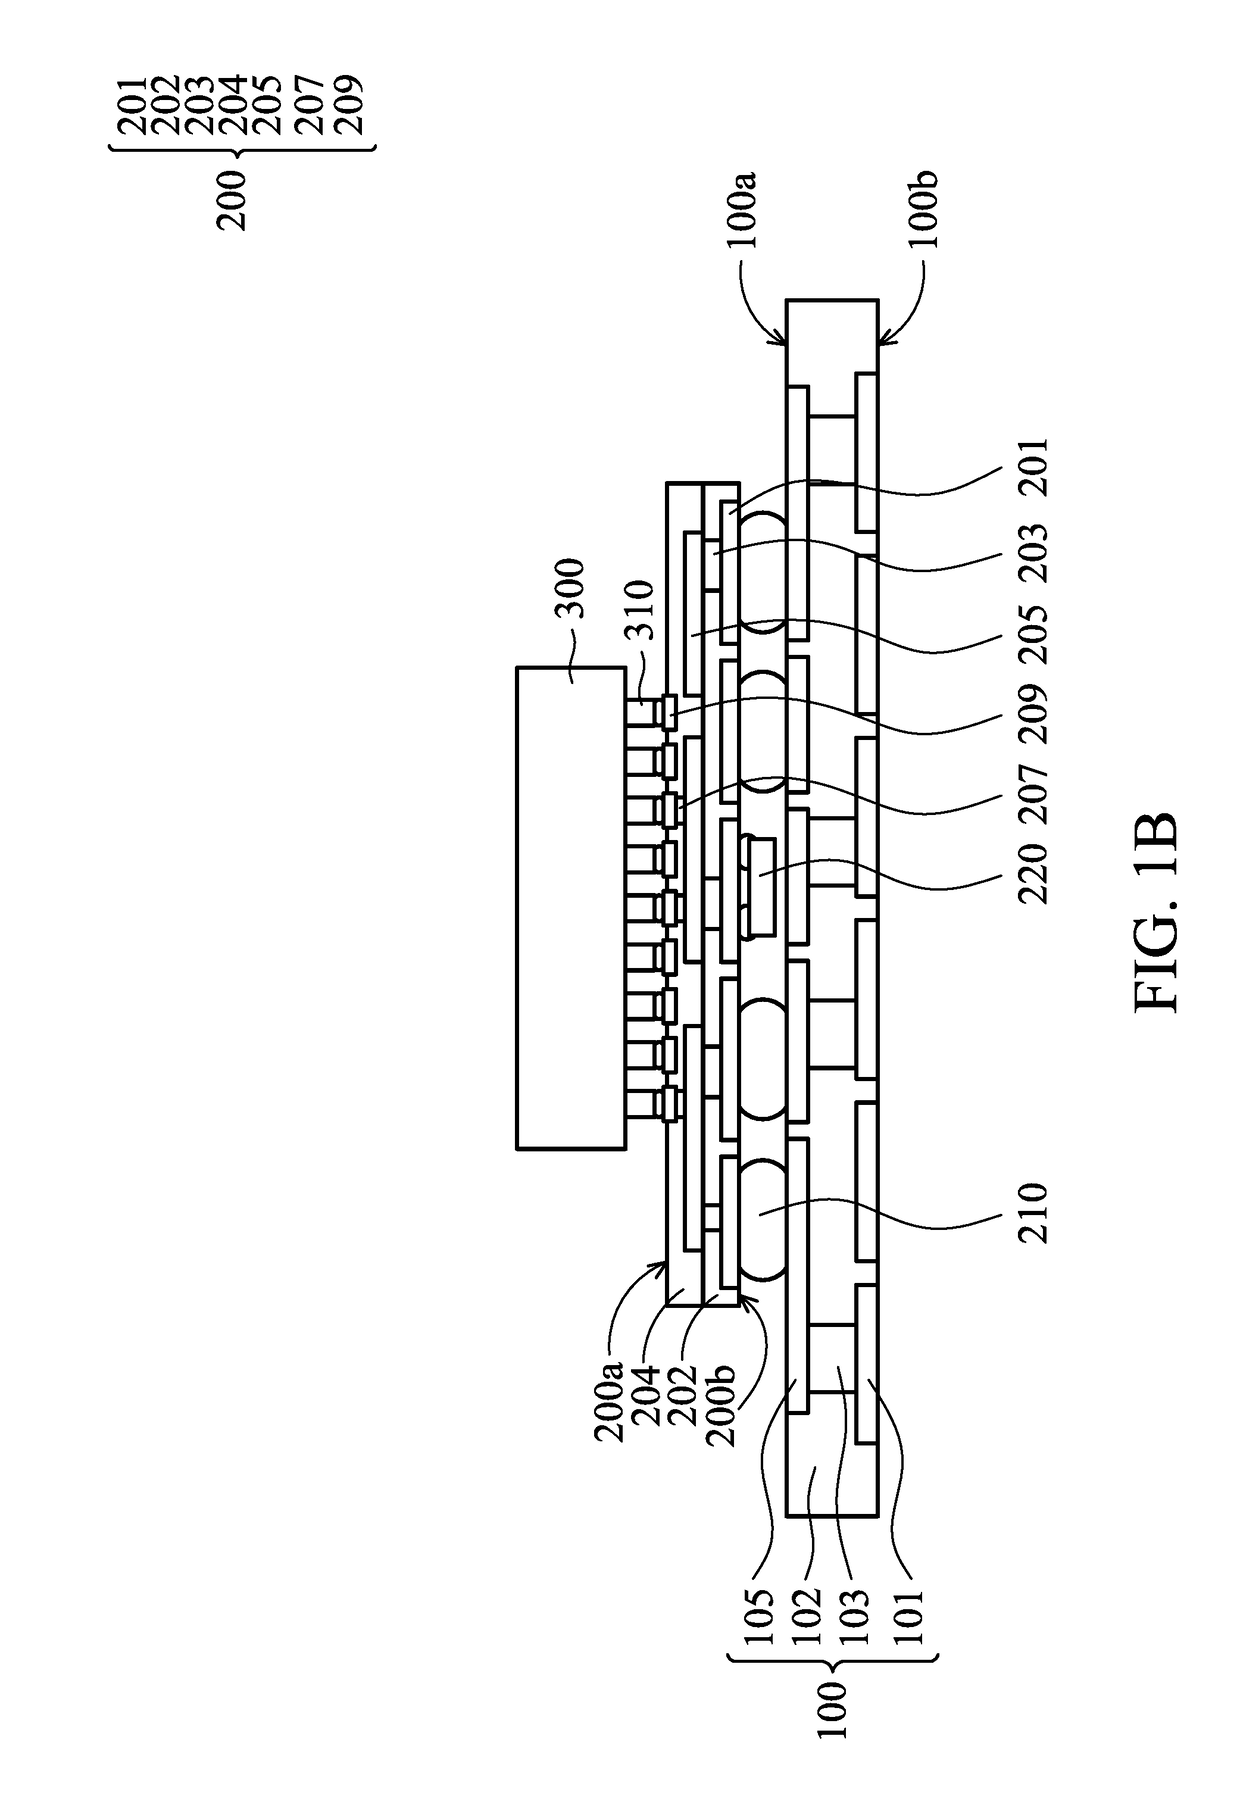 Fan-out package structure having stacked carrier substrates and method for forming the same